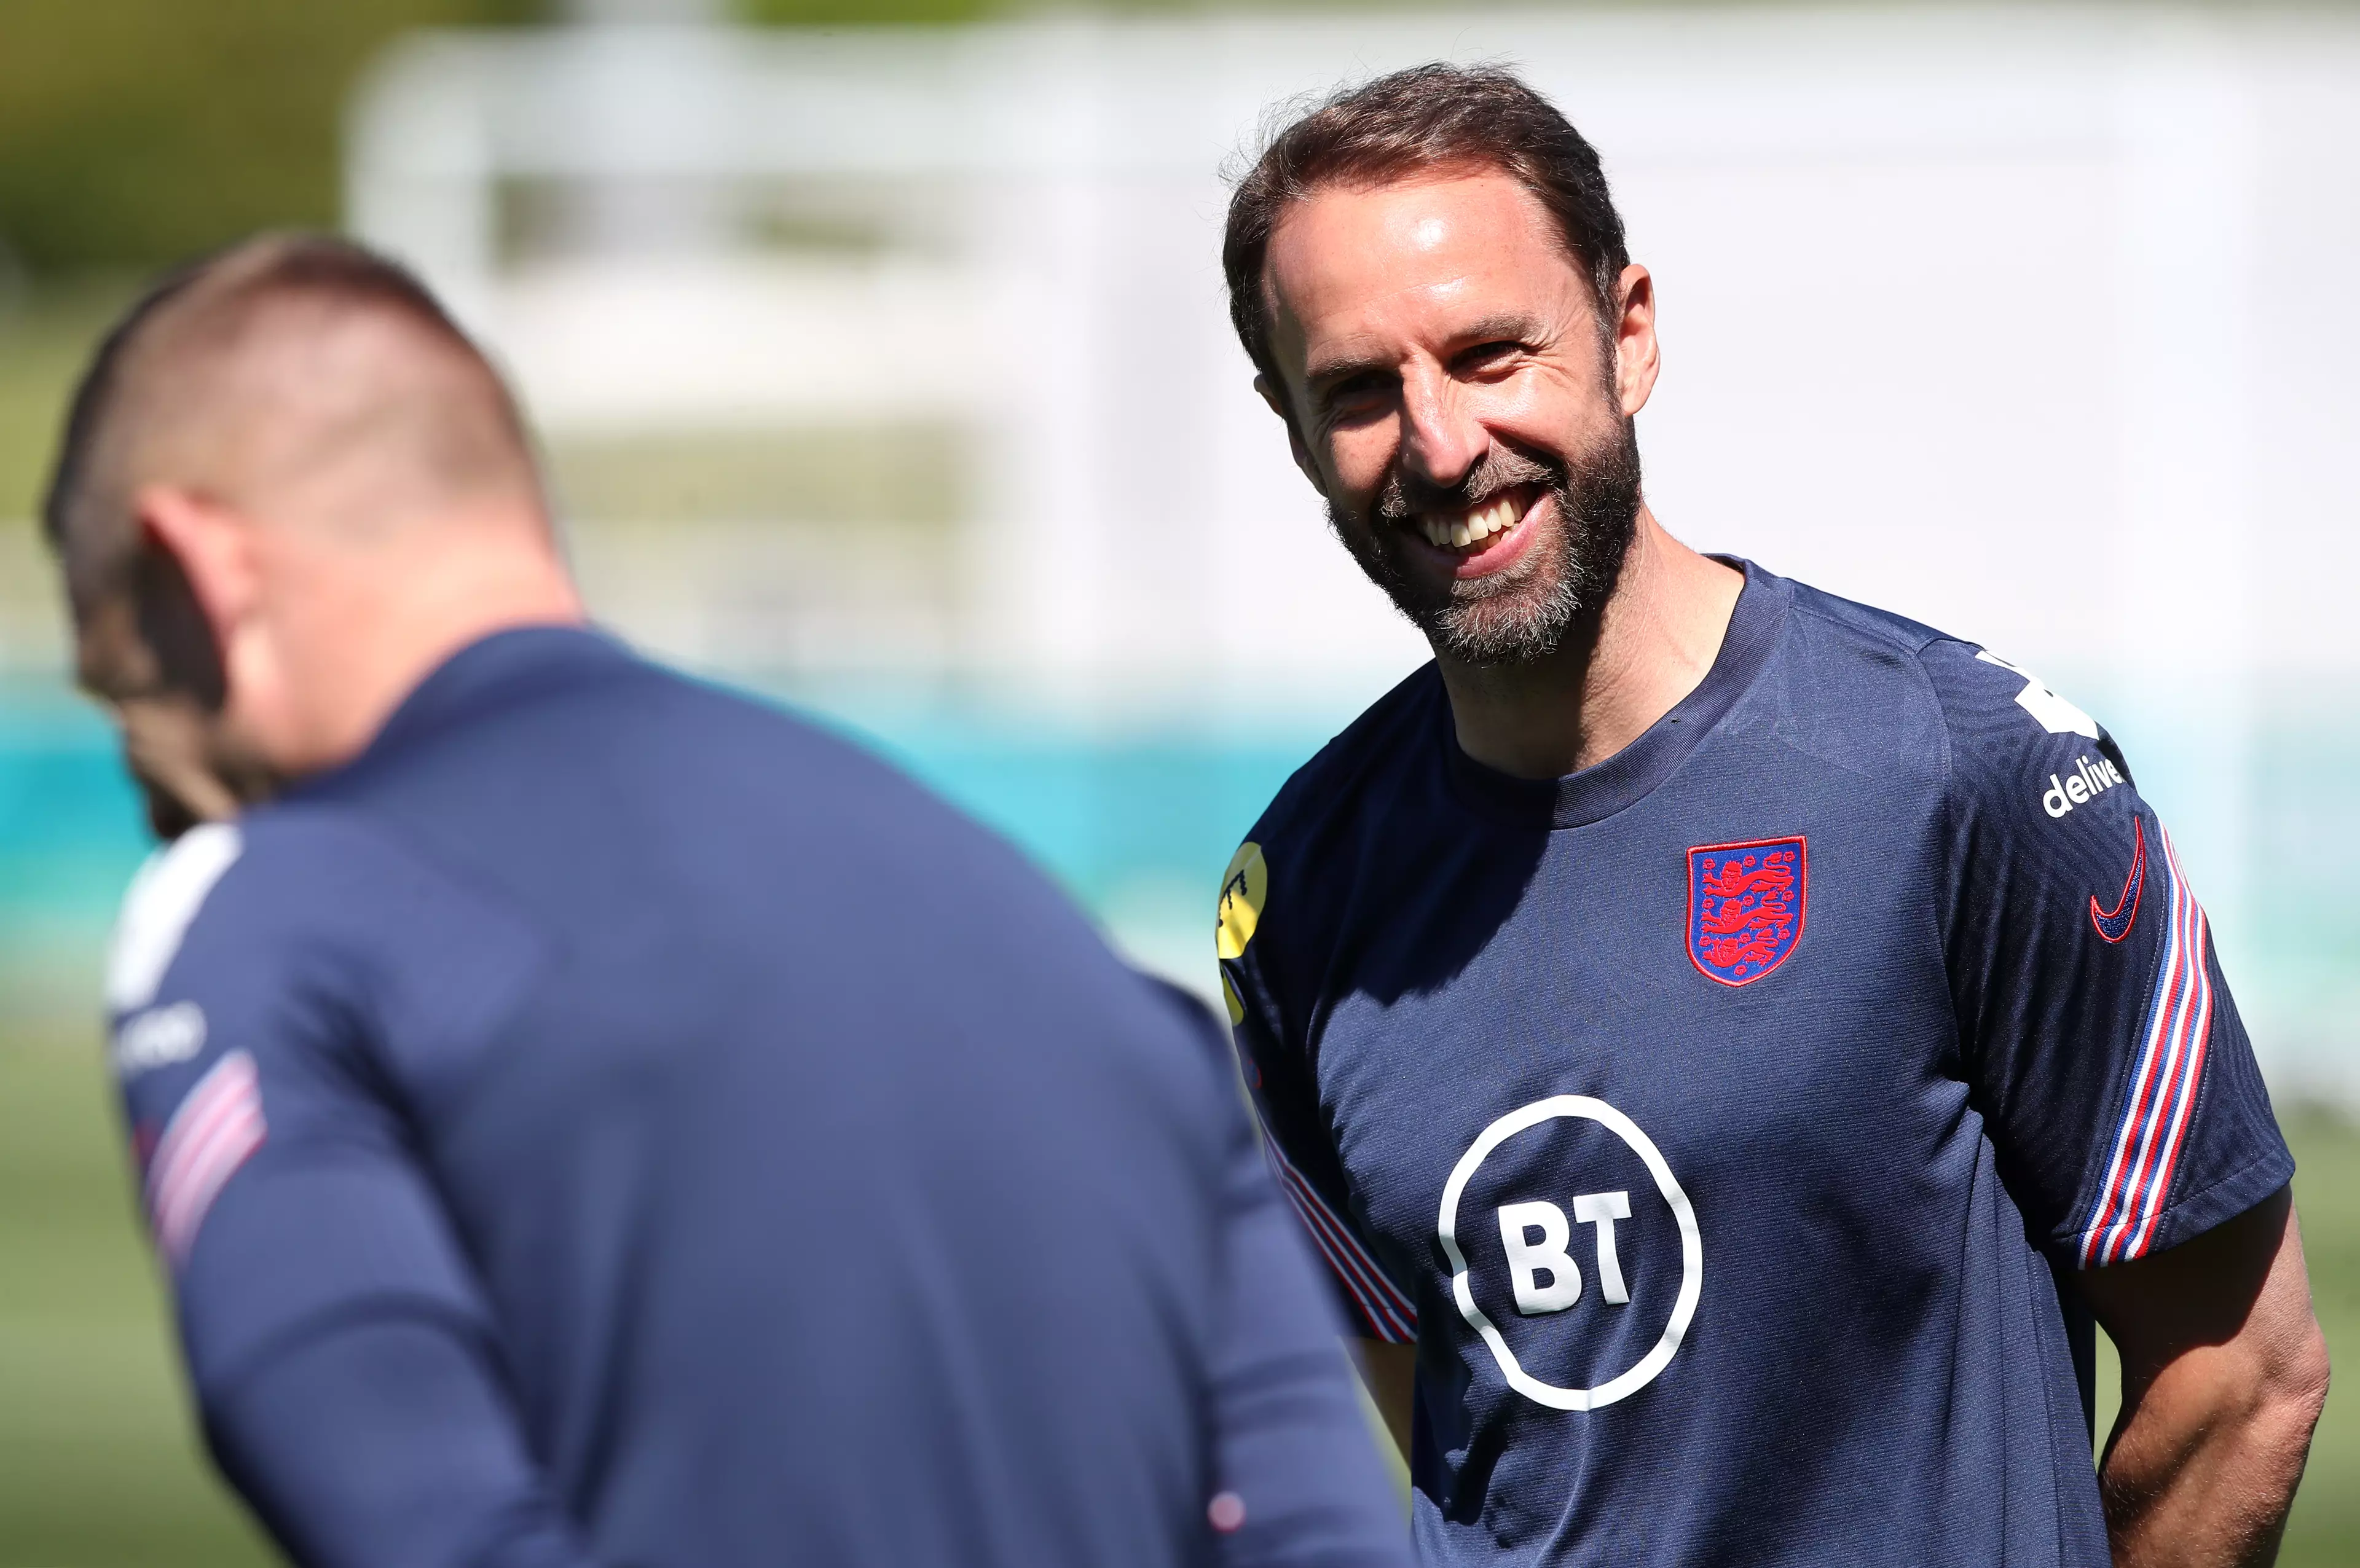 Gareth Southgate's England are the current second-favourites to win Euro 2020